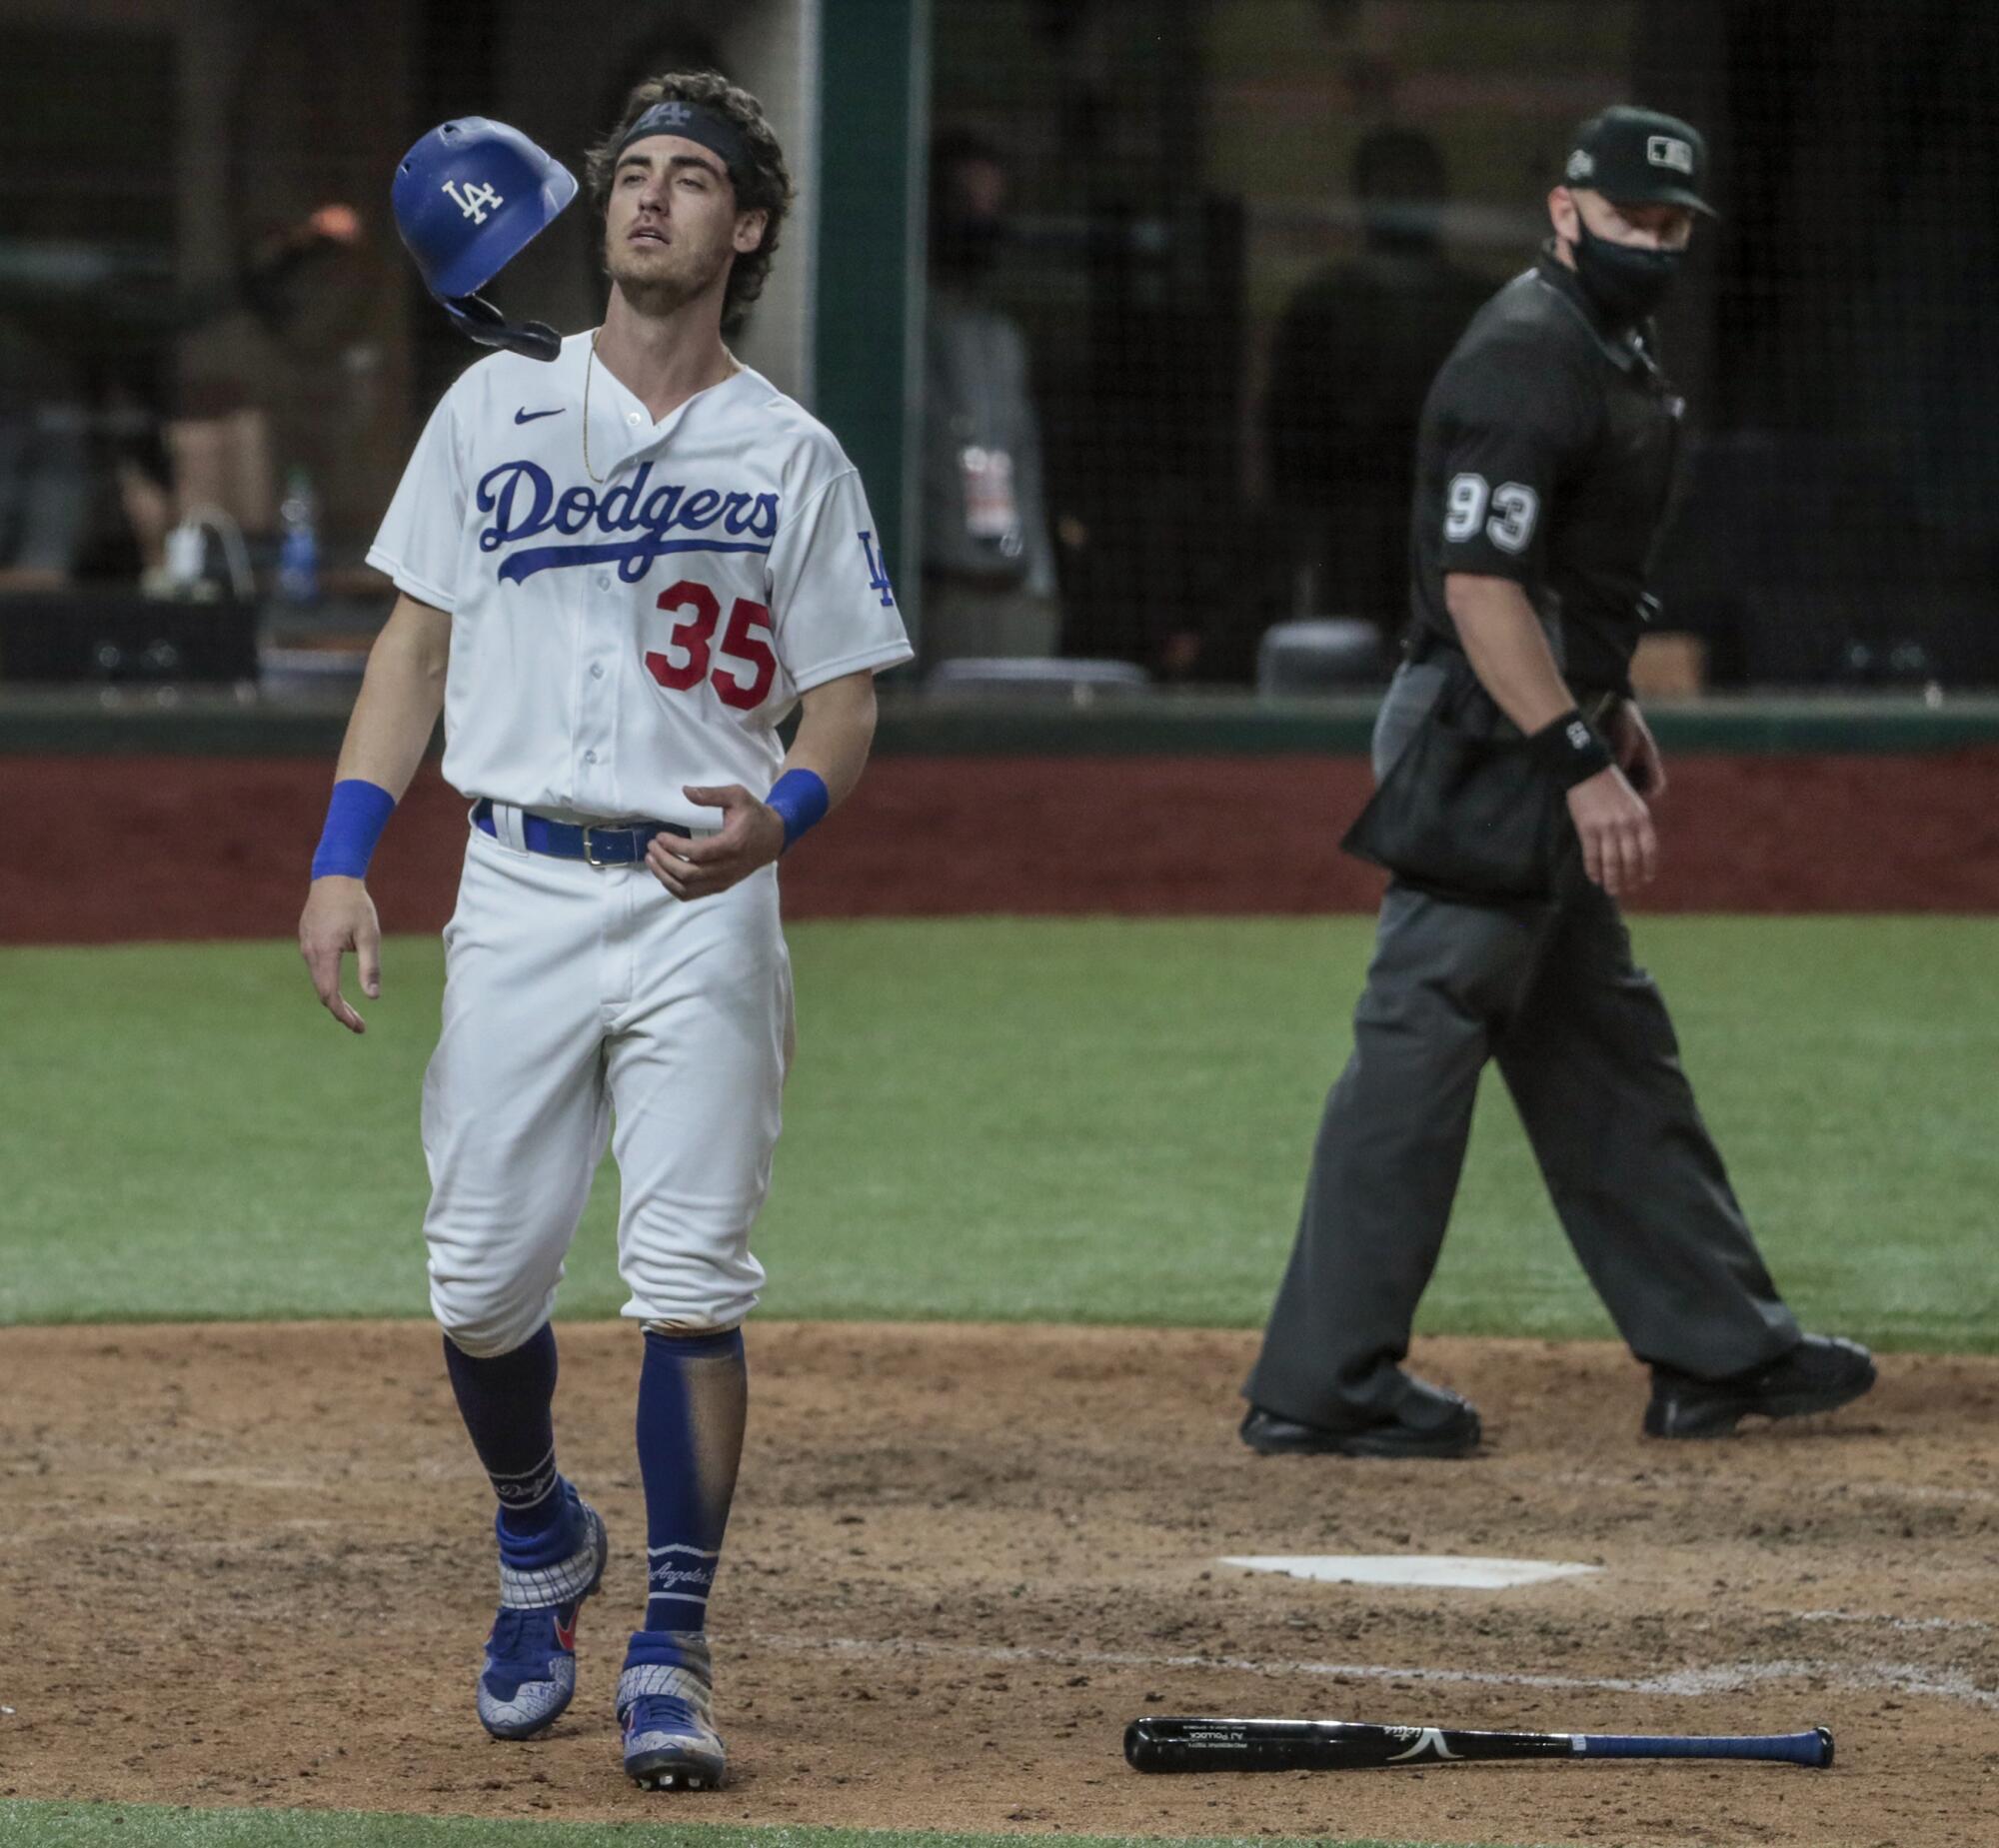 A frustrated Cody Bellinger tosses his helmet after AJ Pollock grounded out to end the game.